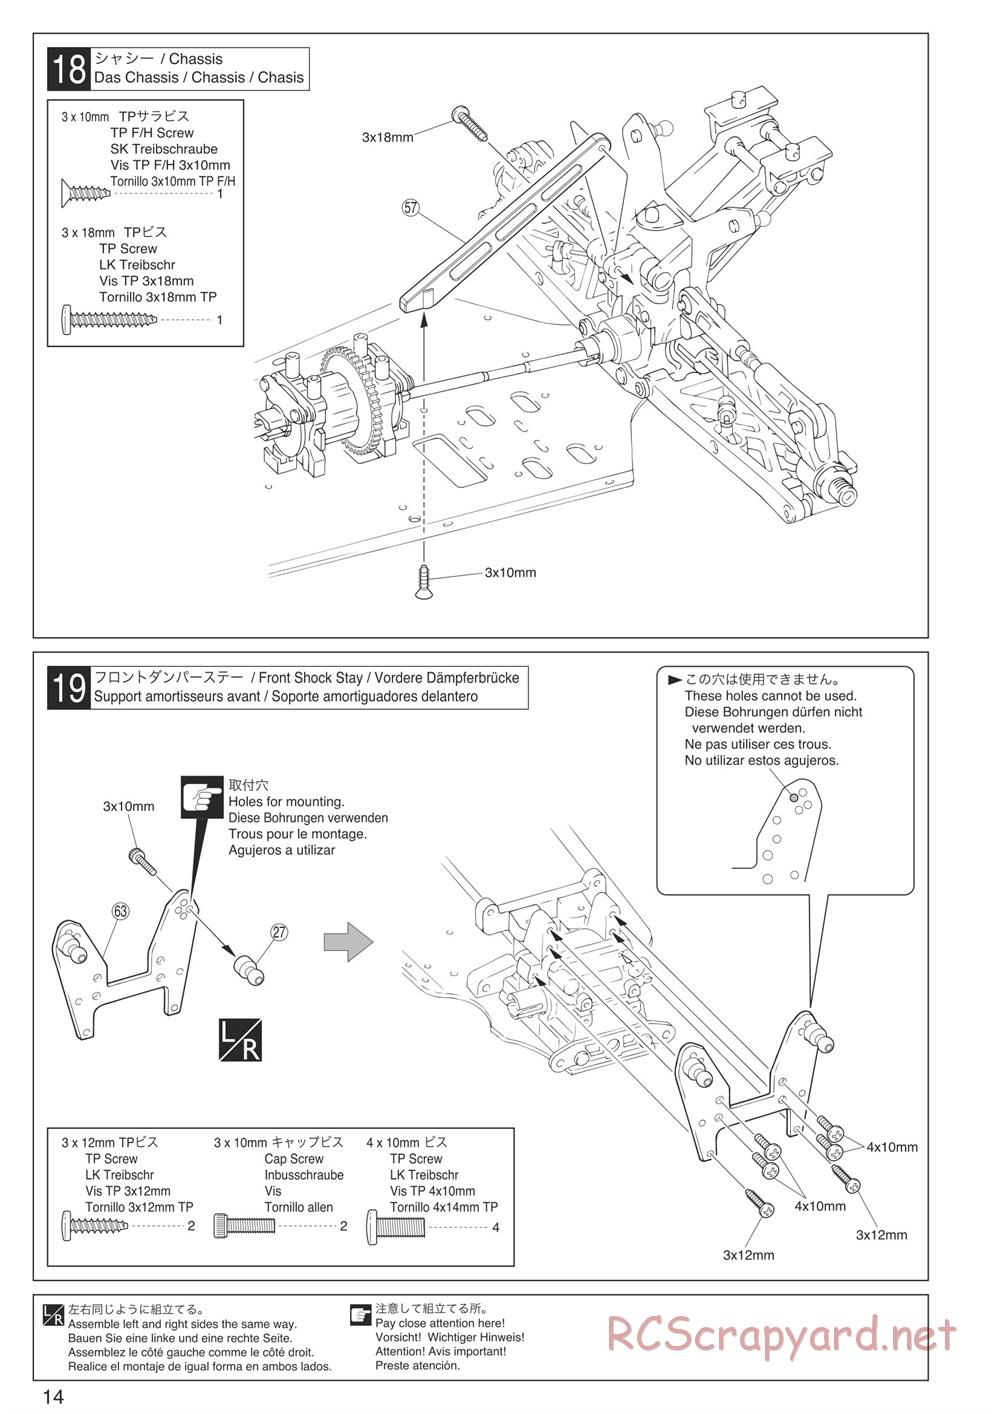 Kyosho - Inferno Neo Race Spec - Manual - Page 14